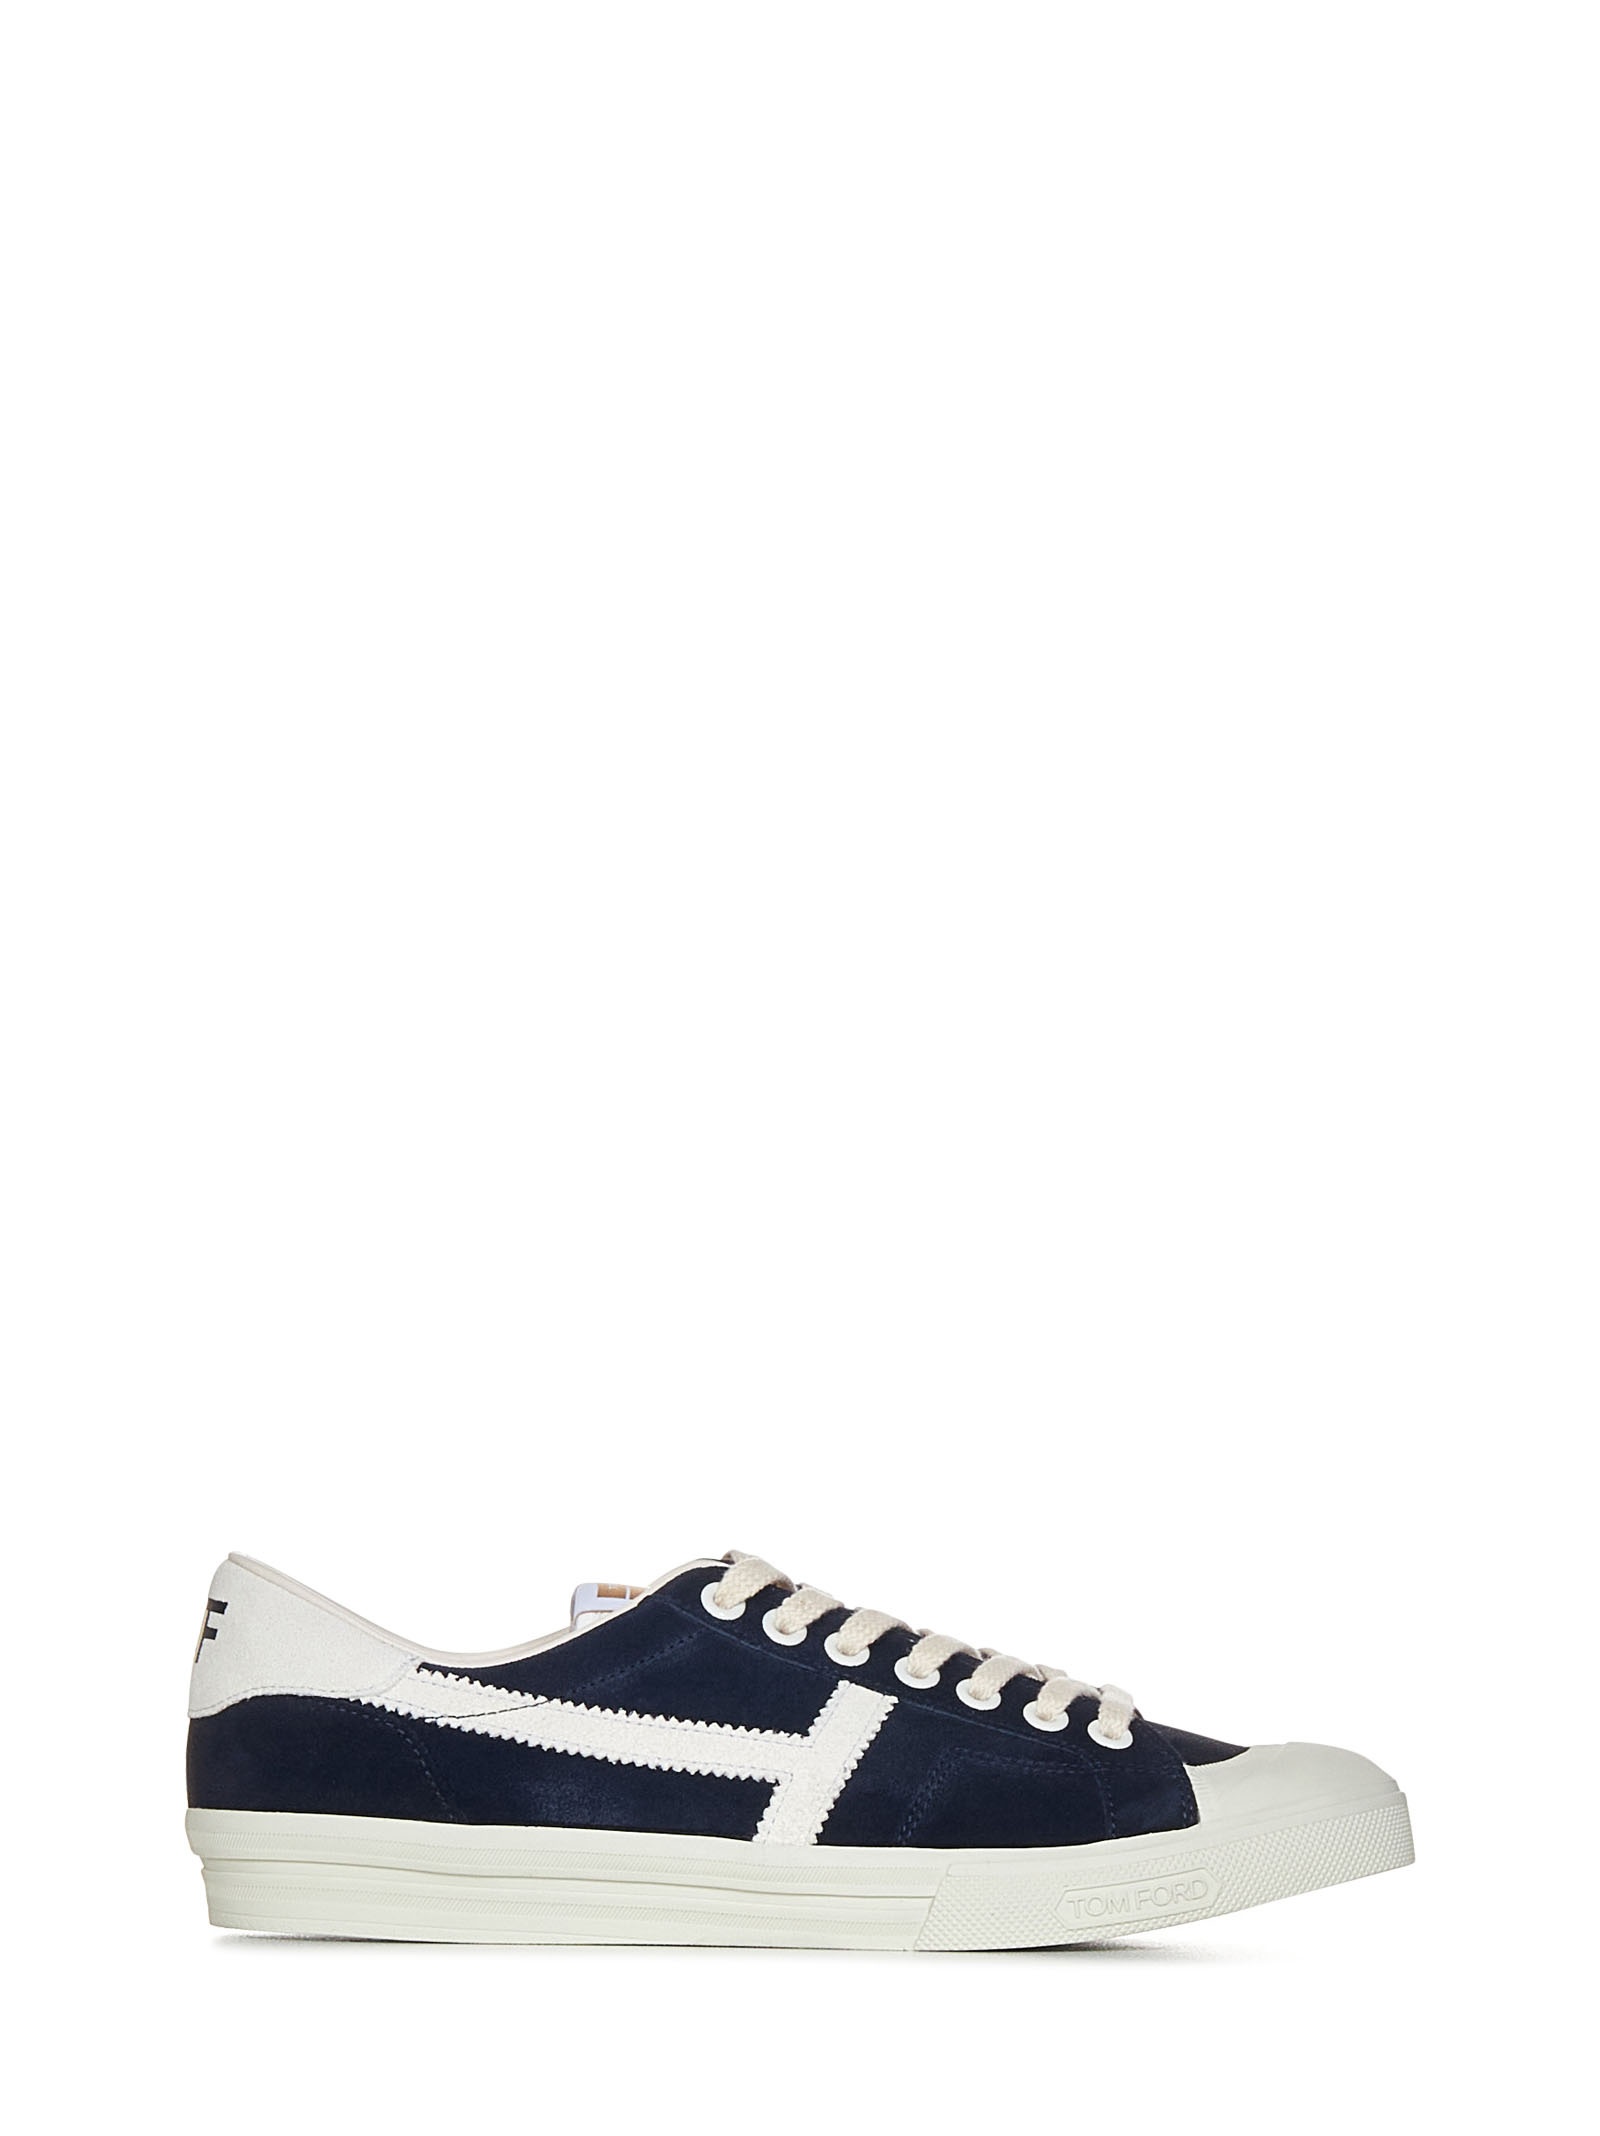 Midnight blue suede low-top sneakers with chalk-colored details and rubber sole. - 1